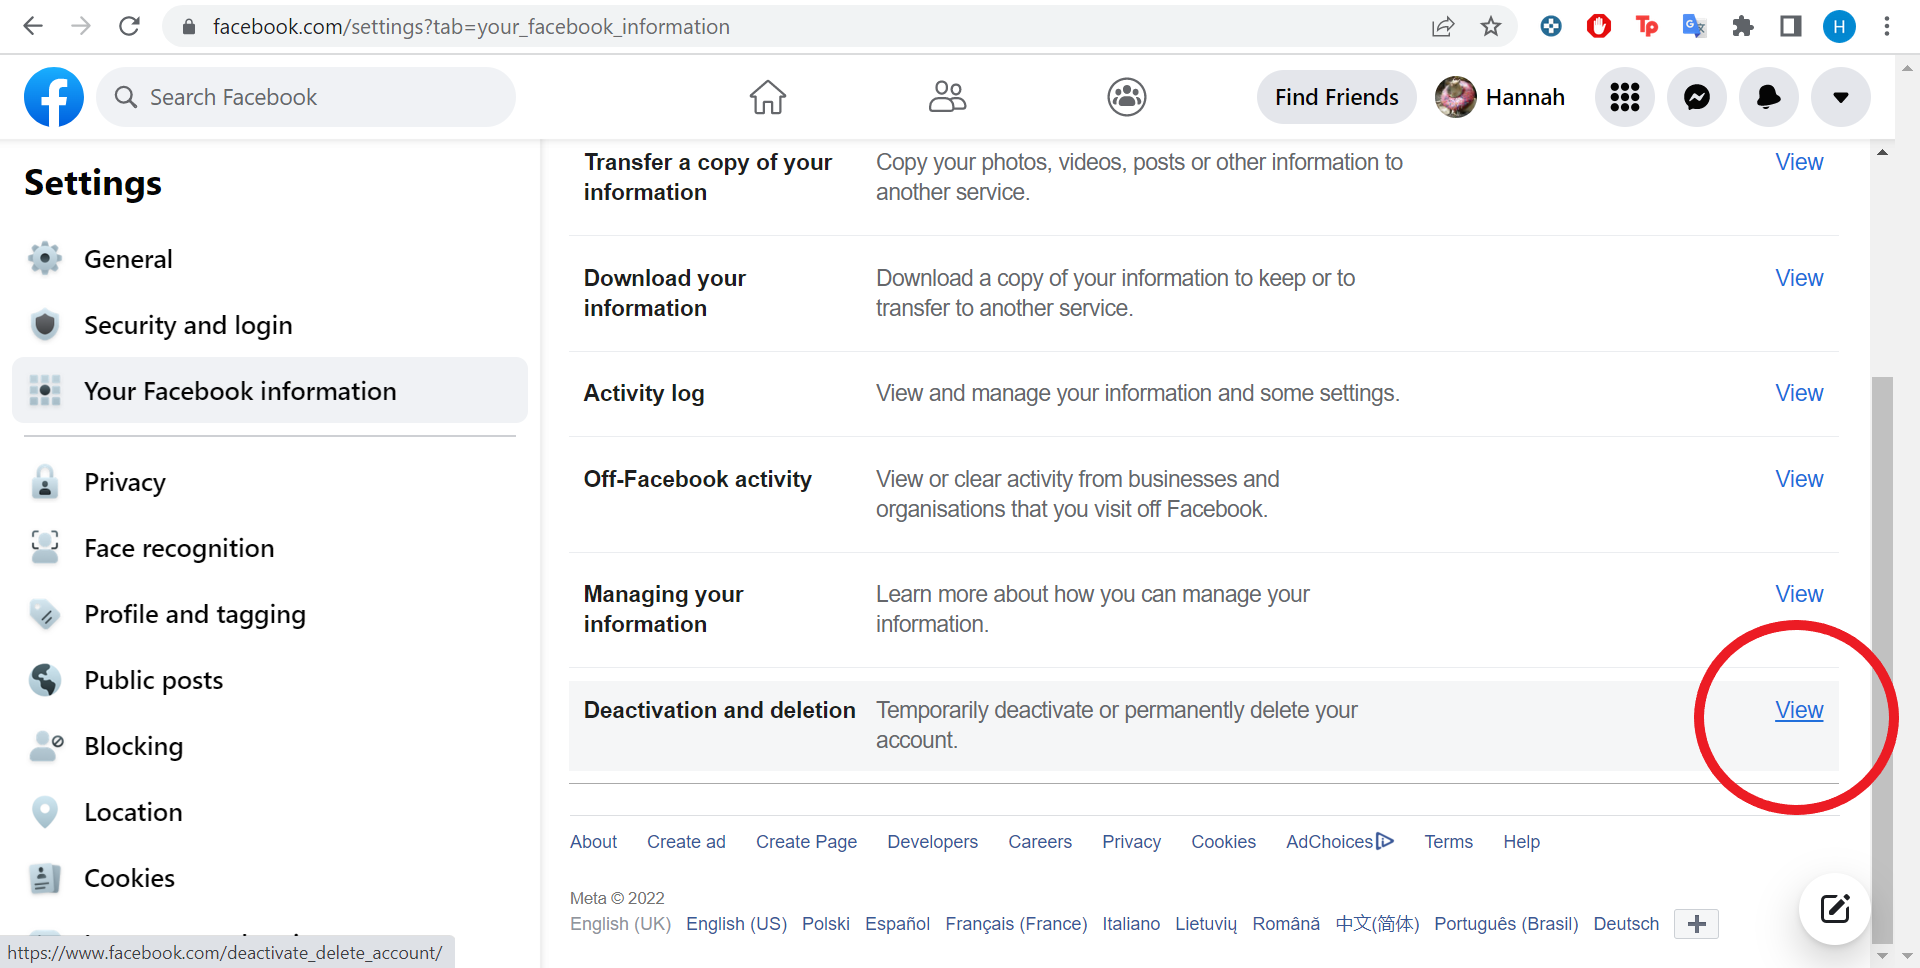 Facebook deactivation and deletion options